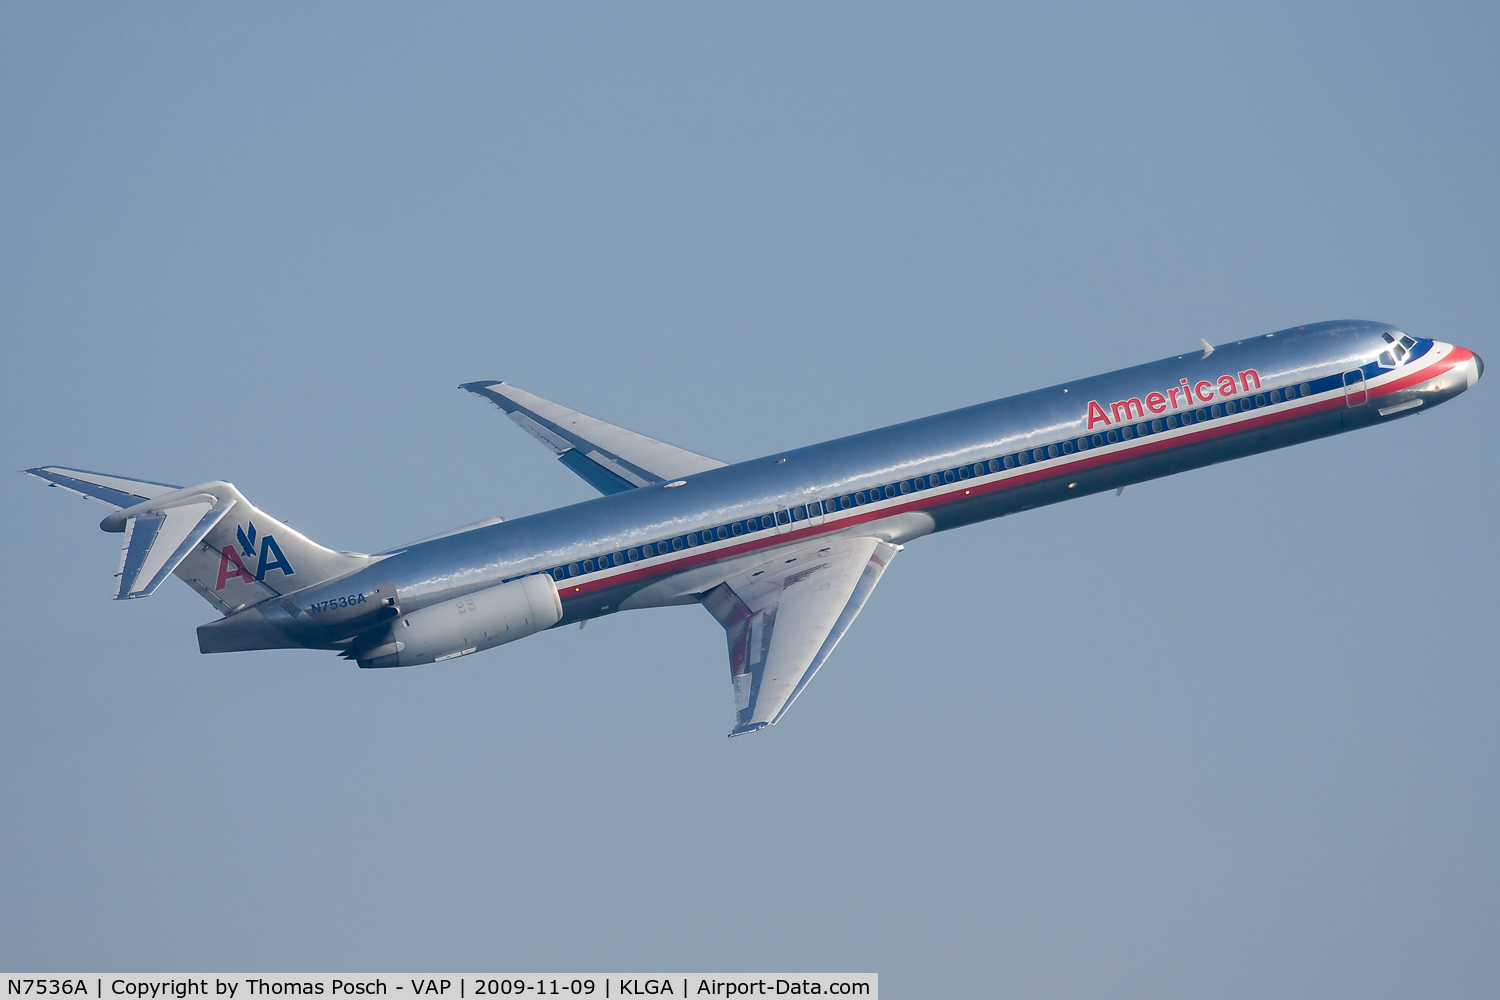 N7536A, 1990 McDonnell Douglas MD-82 (DC-9-82) C/N 49990, American Airlines